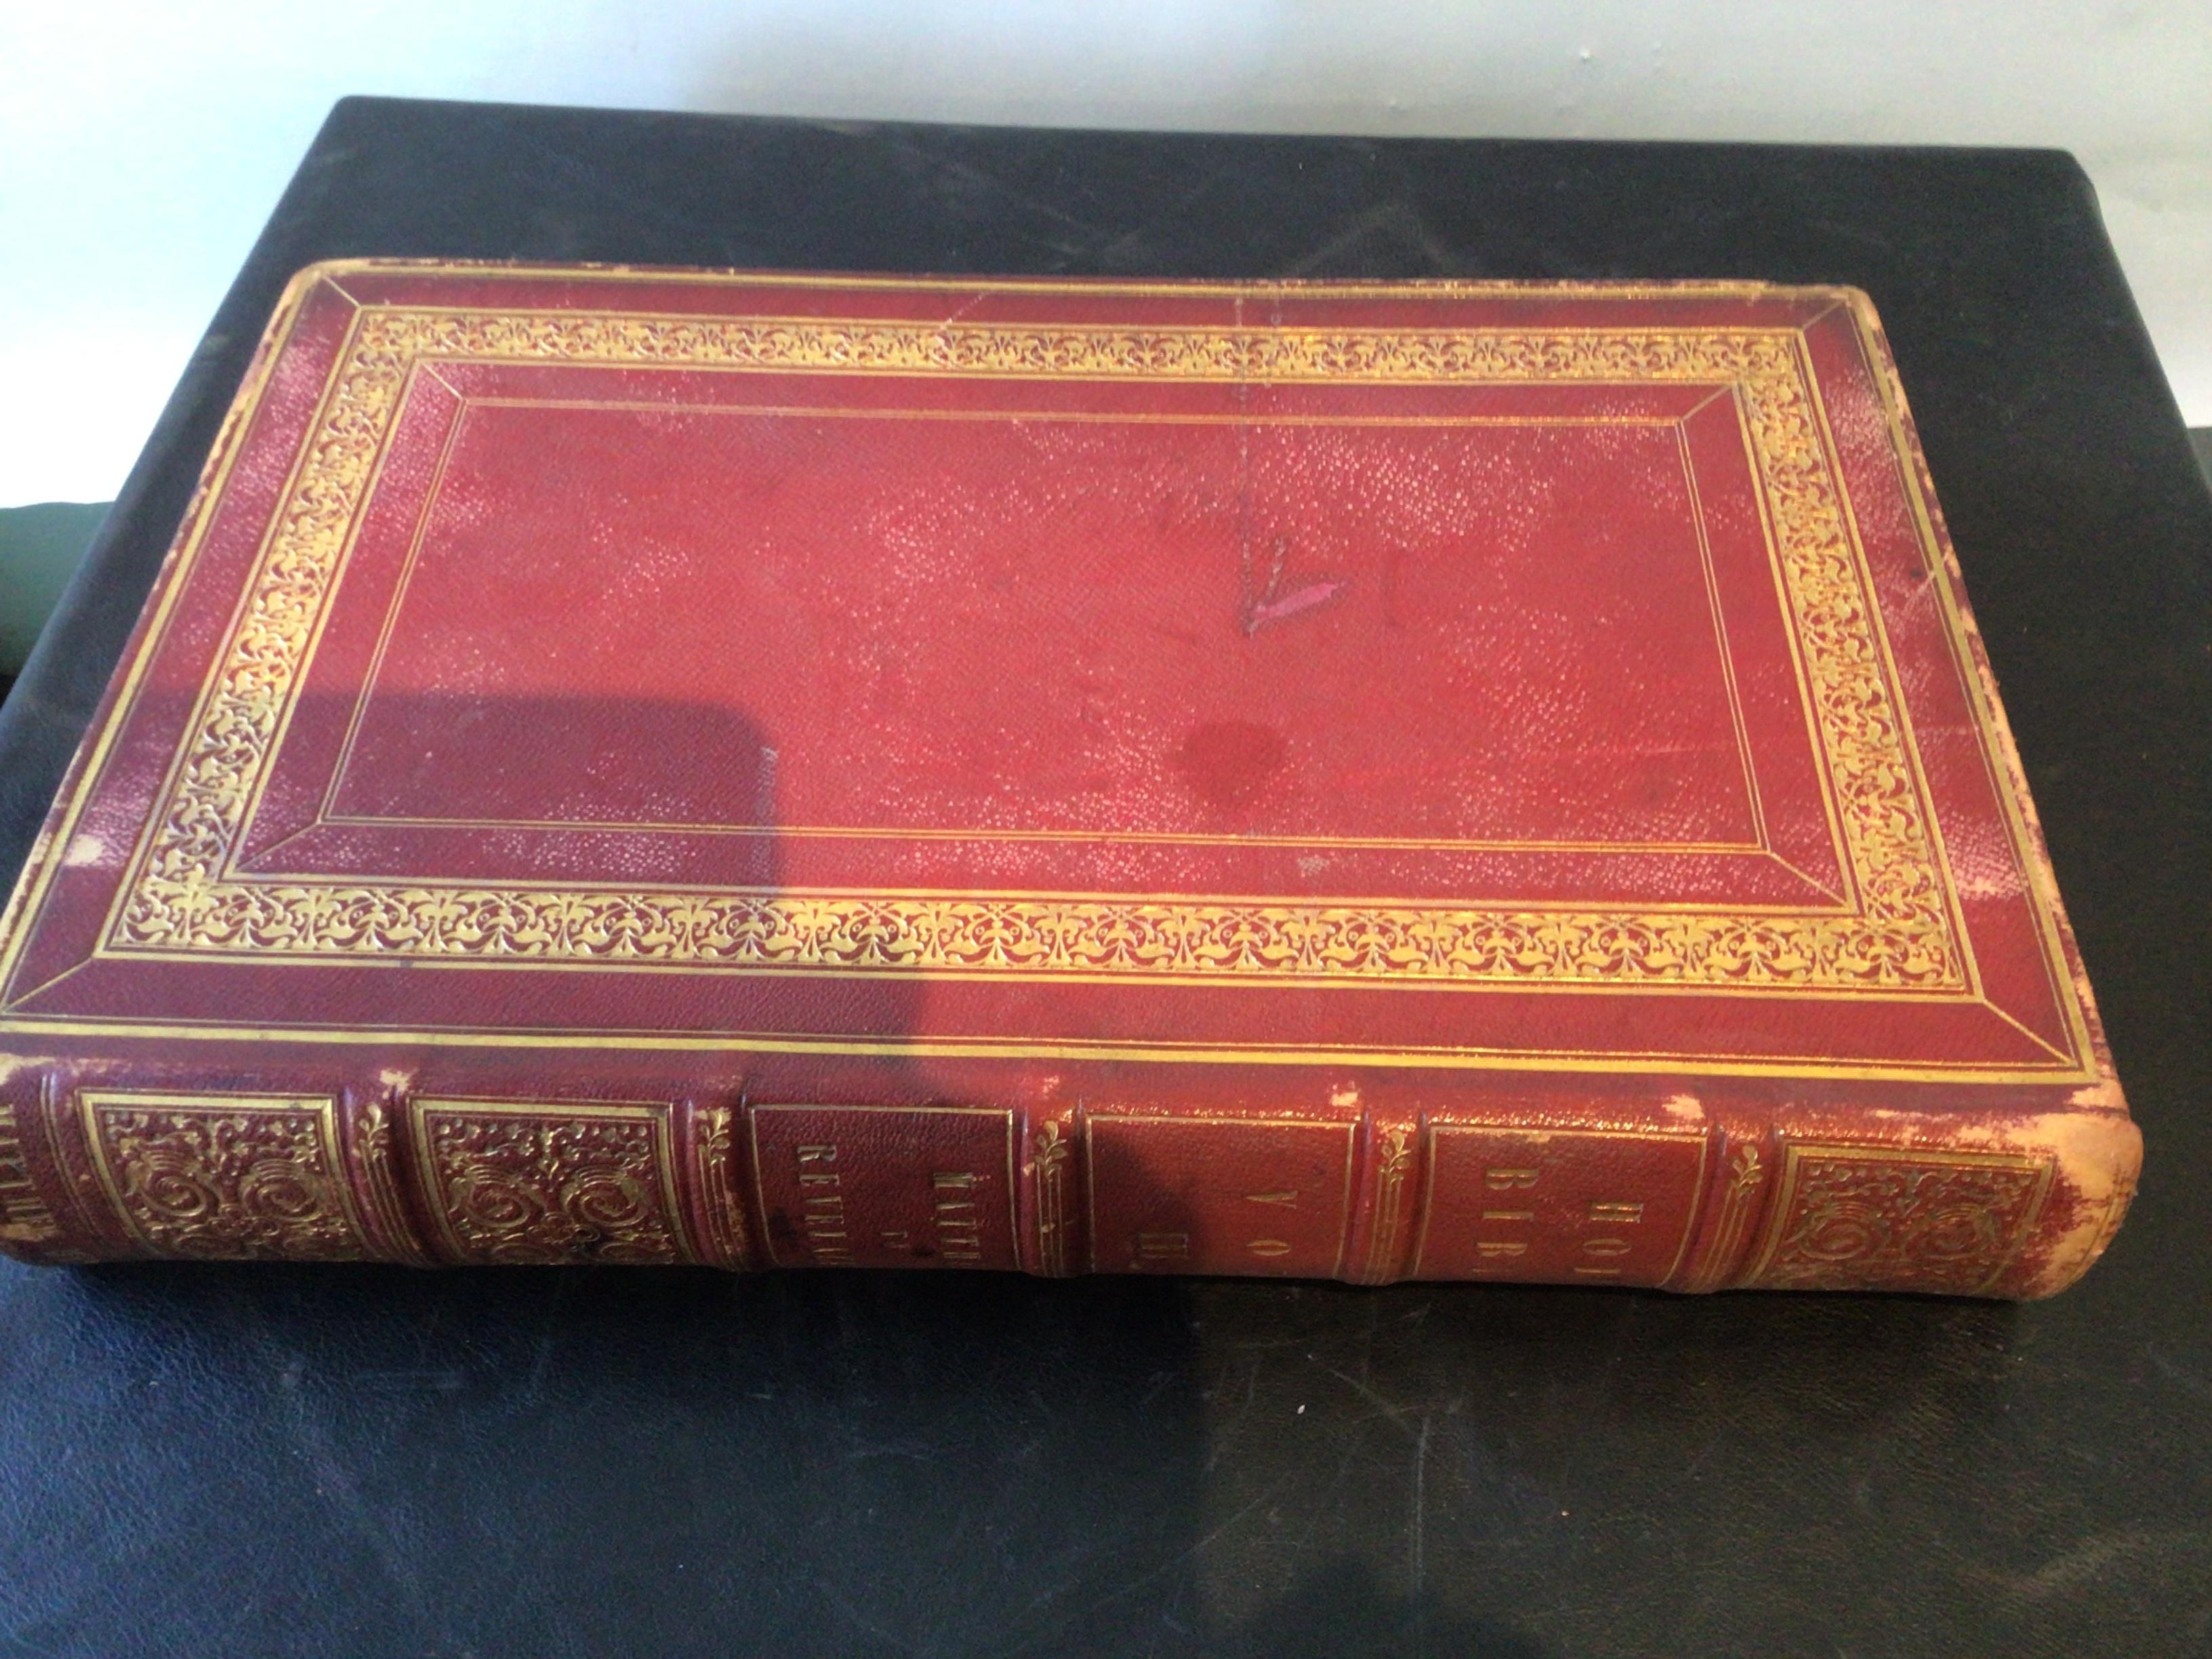 1820s 3 Volume Family Bible Commentary by Mathew Henry For Sale 5